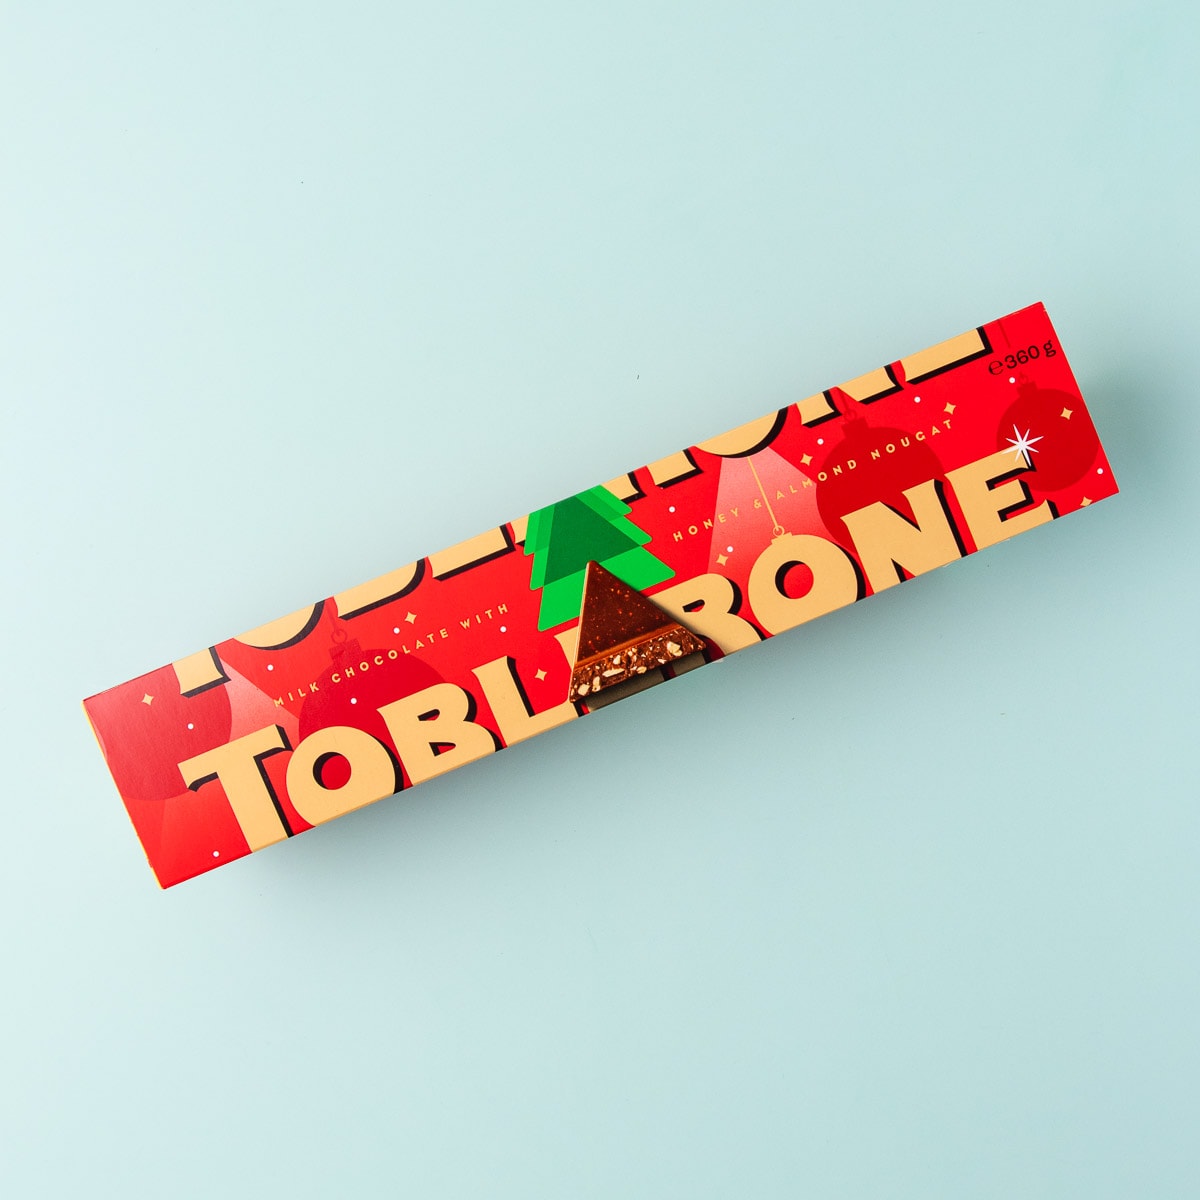 A long triangular block of Toblerone in red Christmas-themed packaging, on a mint green background.